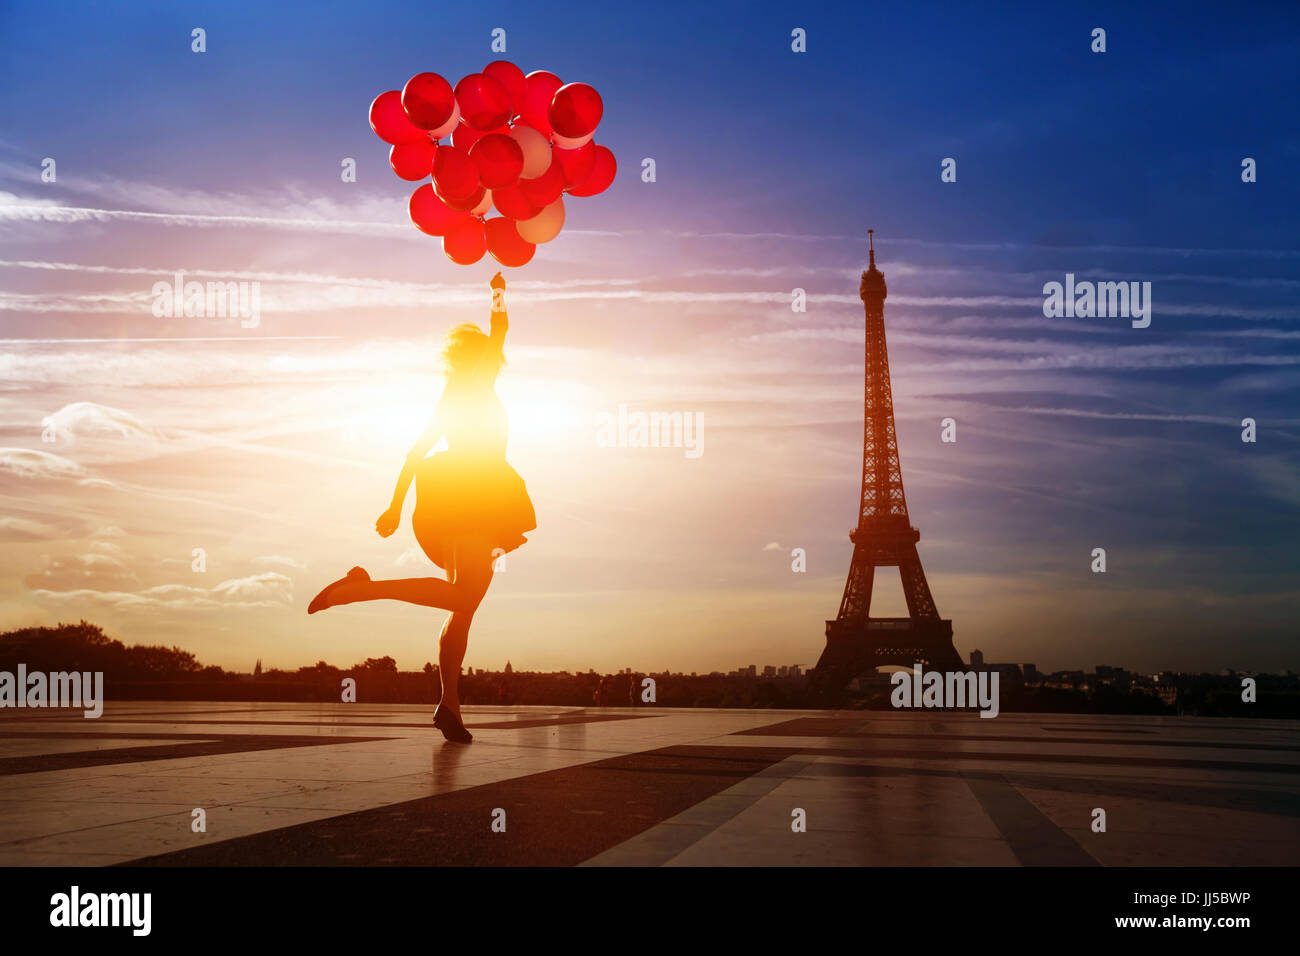 happy woman with red balloons jumping near Eiffel tower in Paris Stock Photo